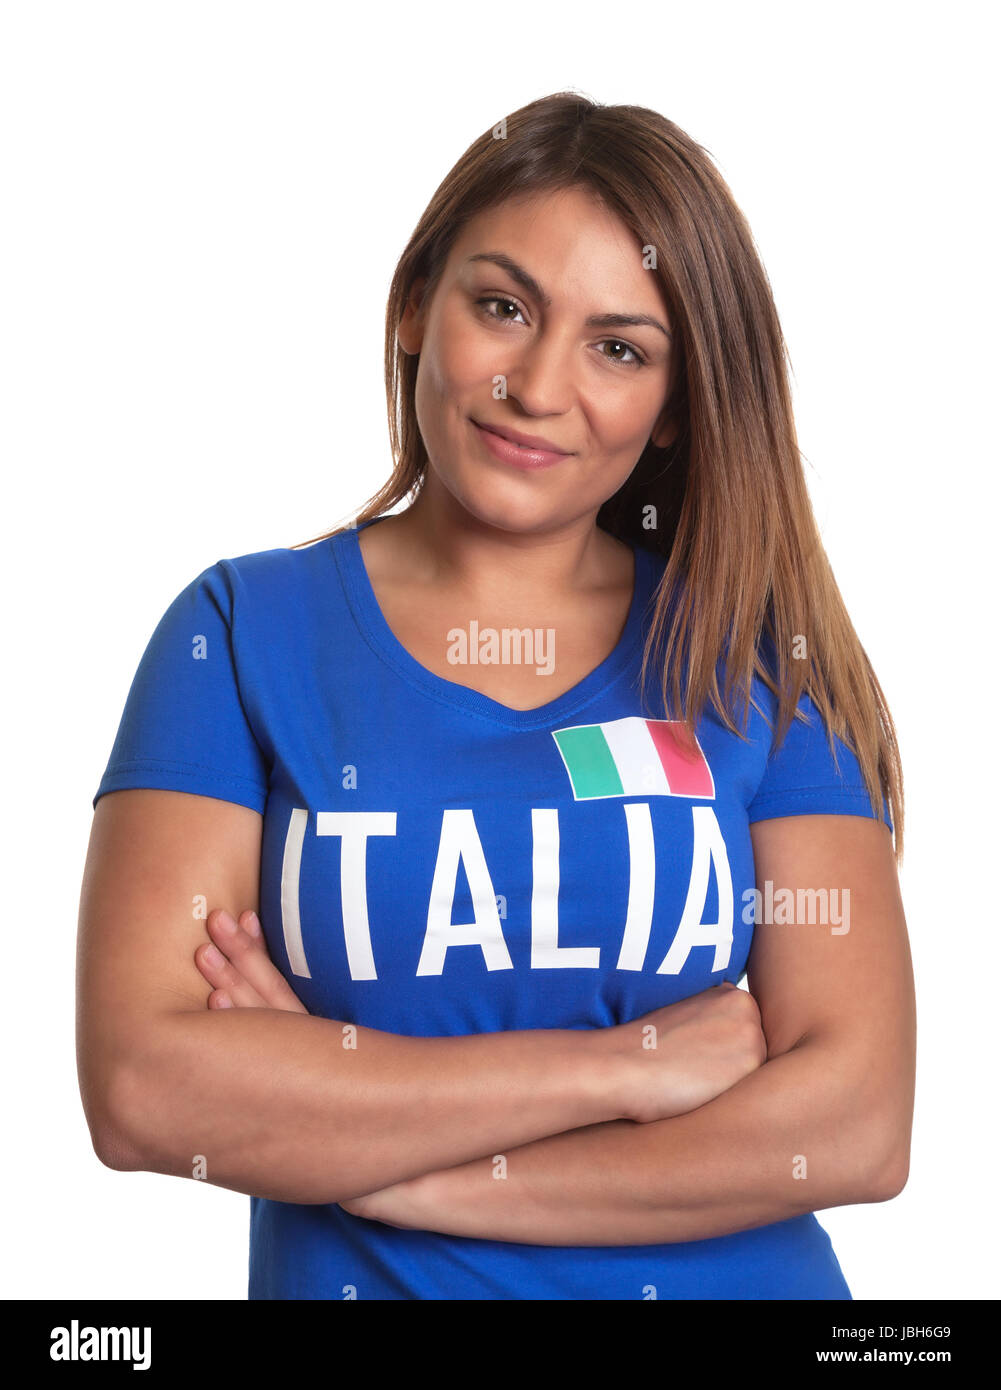 Beautiful Italian Girl With Crossed Arms In A Blue Soccer Jersey Looking At Camera On An